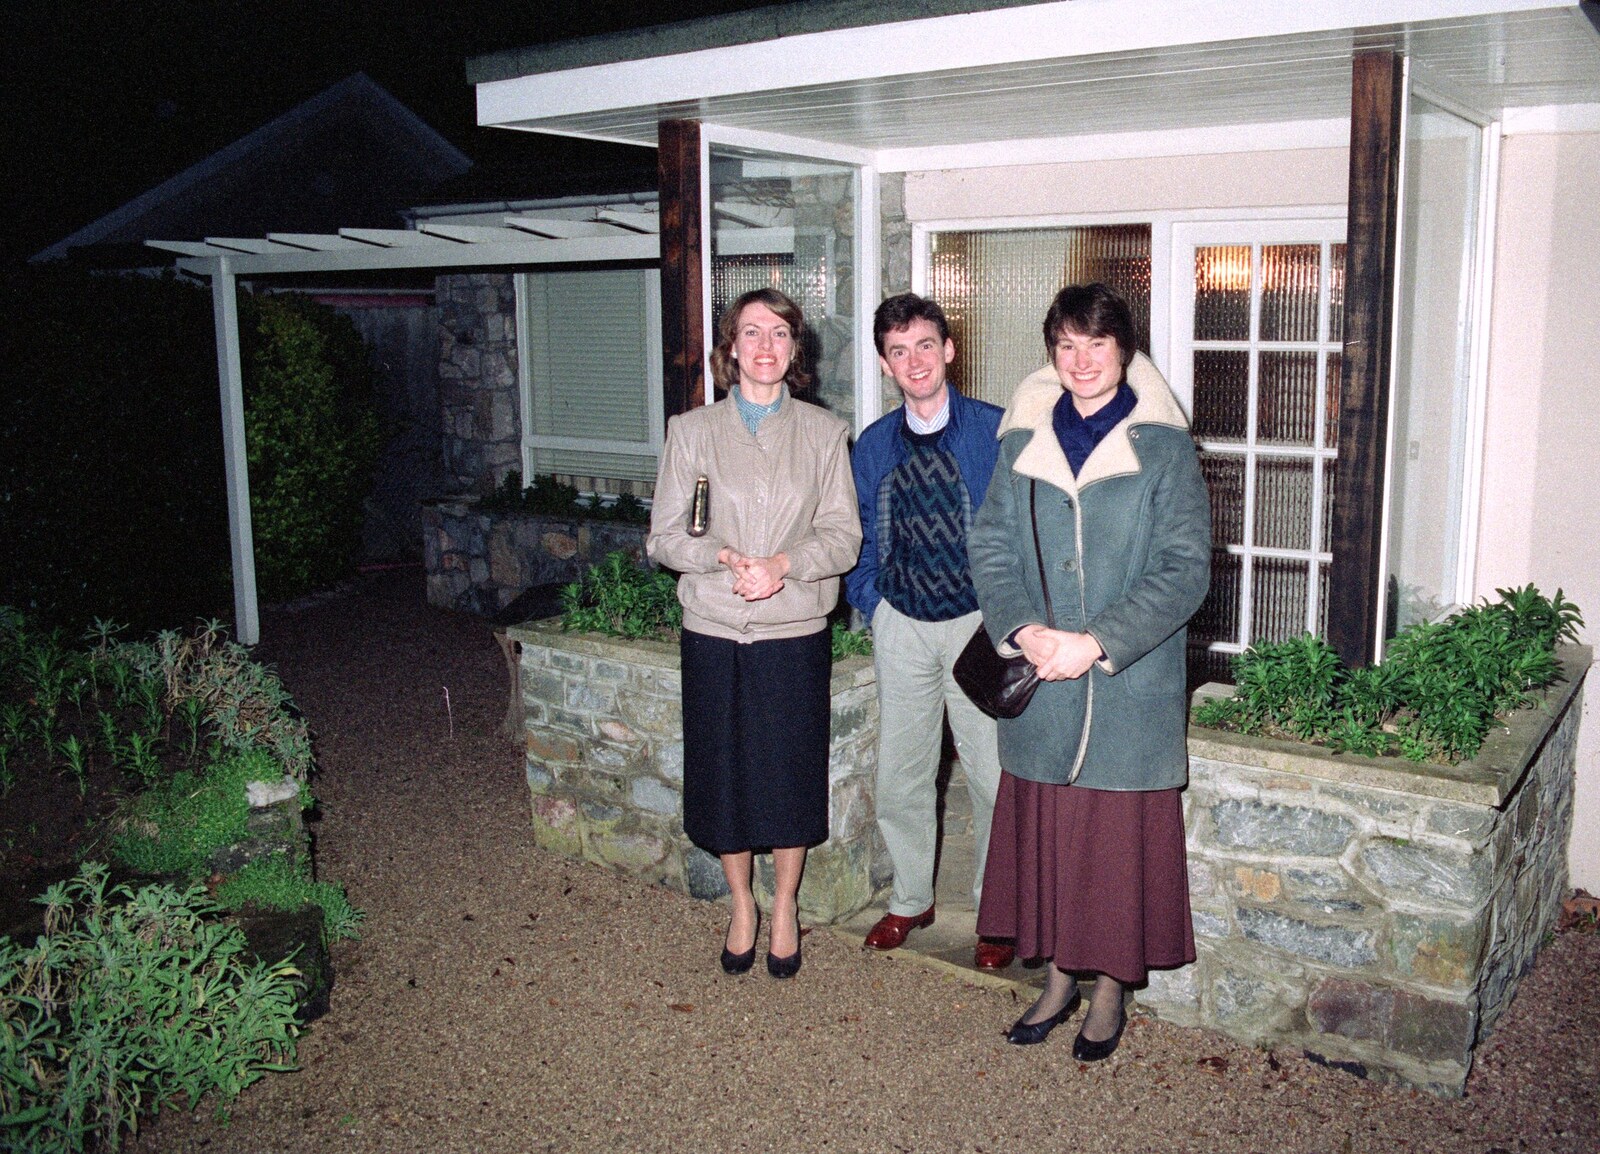 Jane, John and Angela outside John's house from Uni: A Dinner Party, Harbertonford and Buckfastleigh, Devon - 24th December 1988